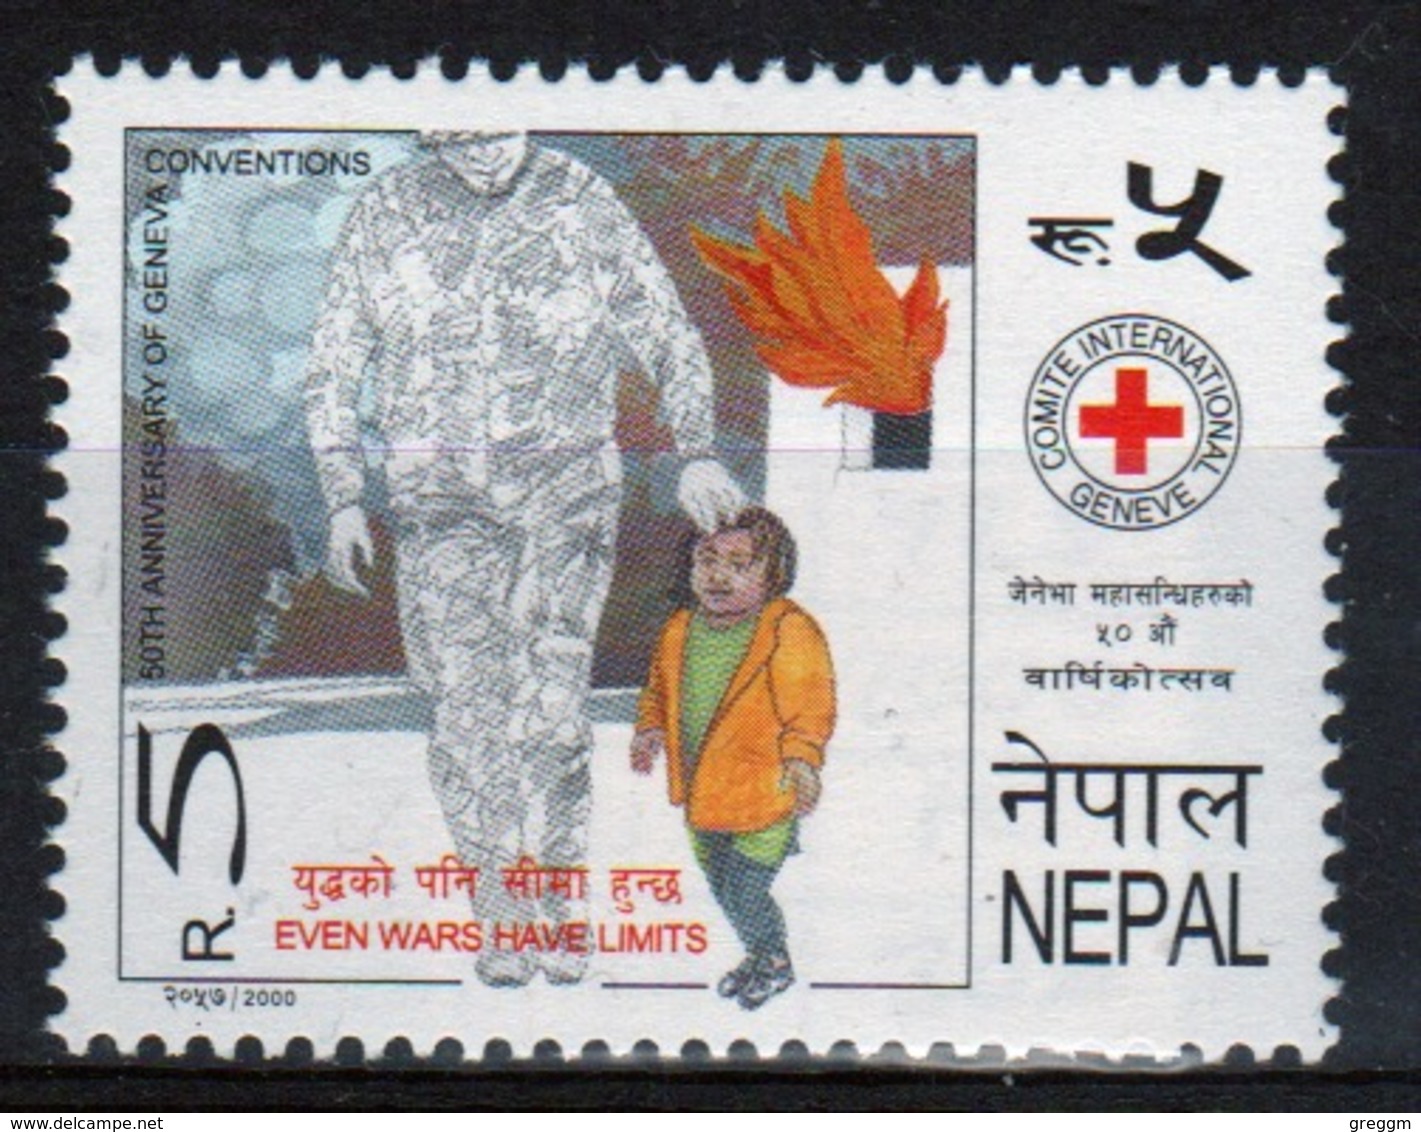 Red Cross Nepal 2000 Stamp Celebrating The 50th Anniversary Of The Geneva Convention. - Red Cross